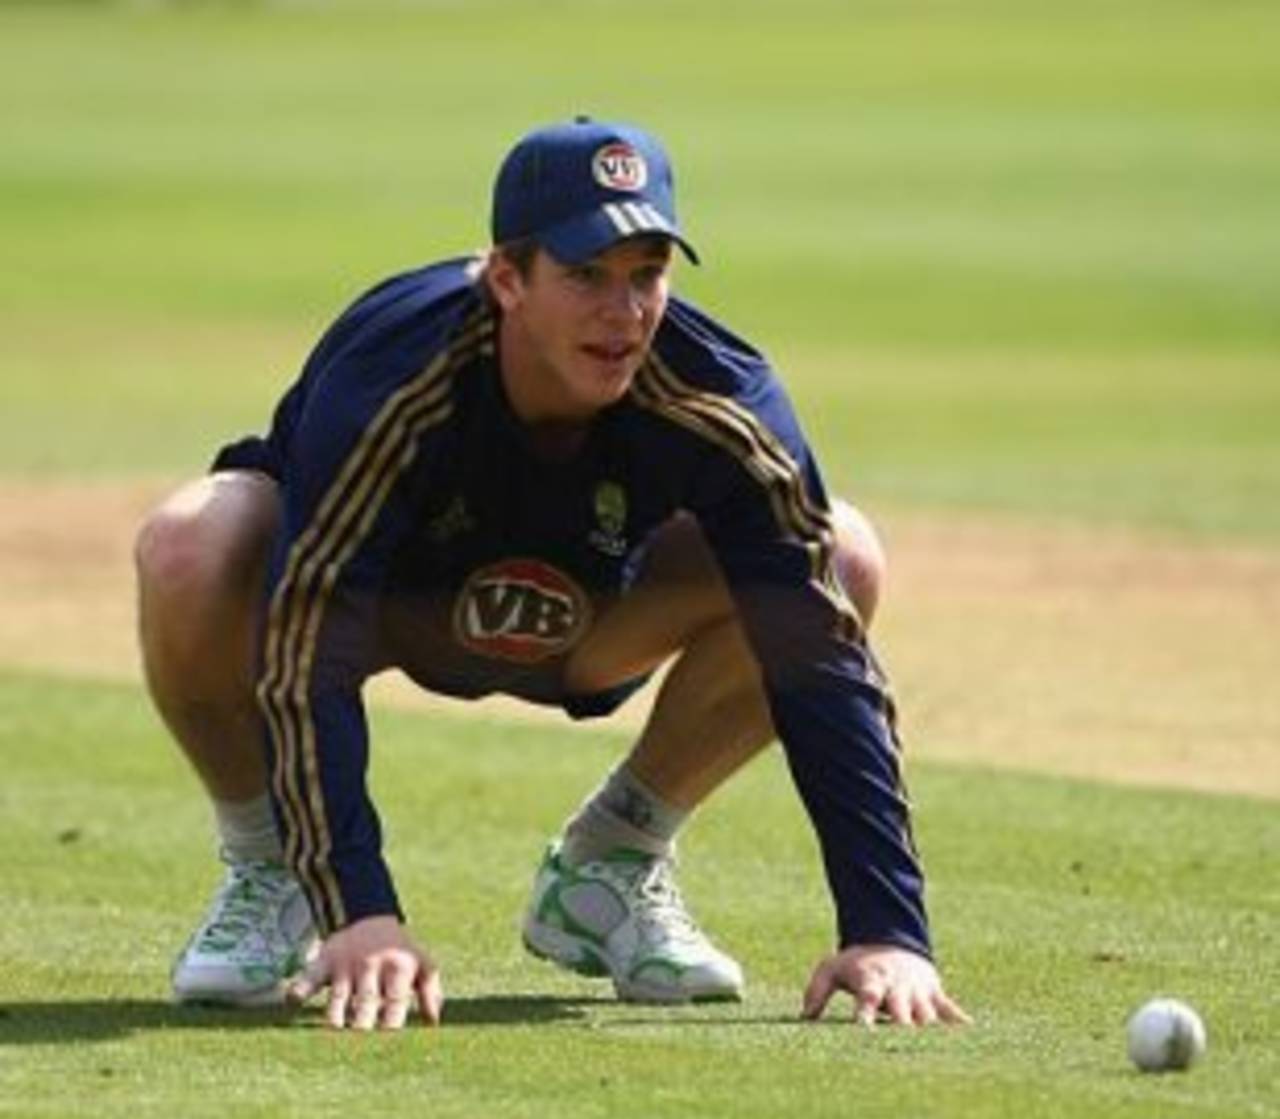 Tim Paine watches the ball during a practice session ahead of the second ODI against England, Lord's, September 5, 2009